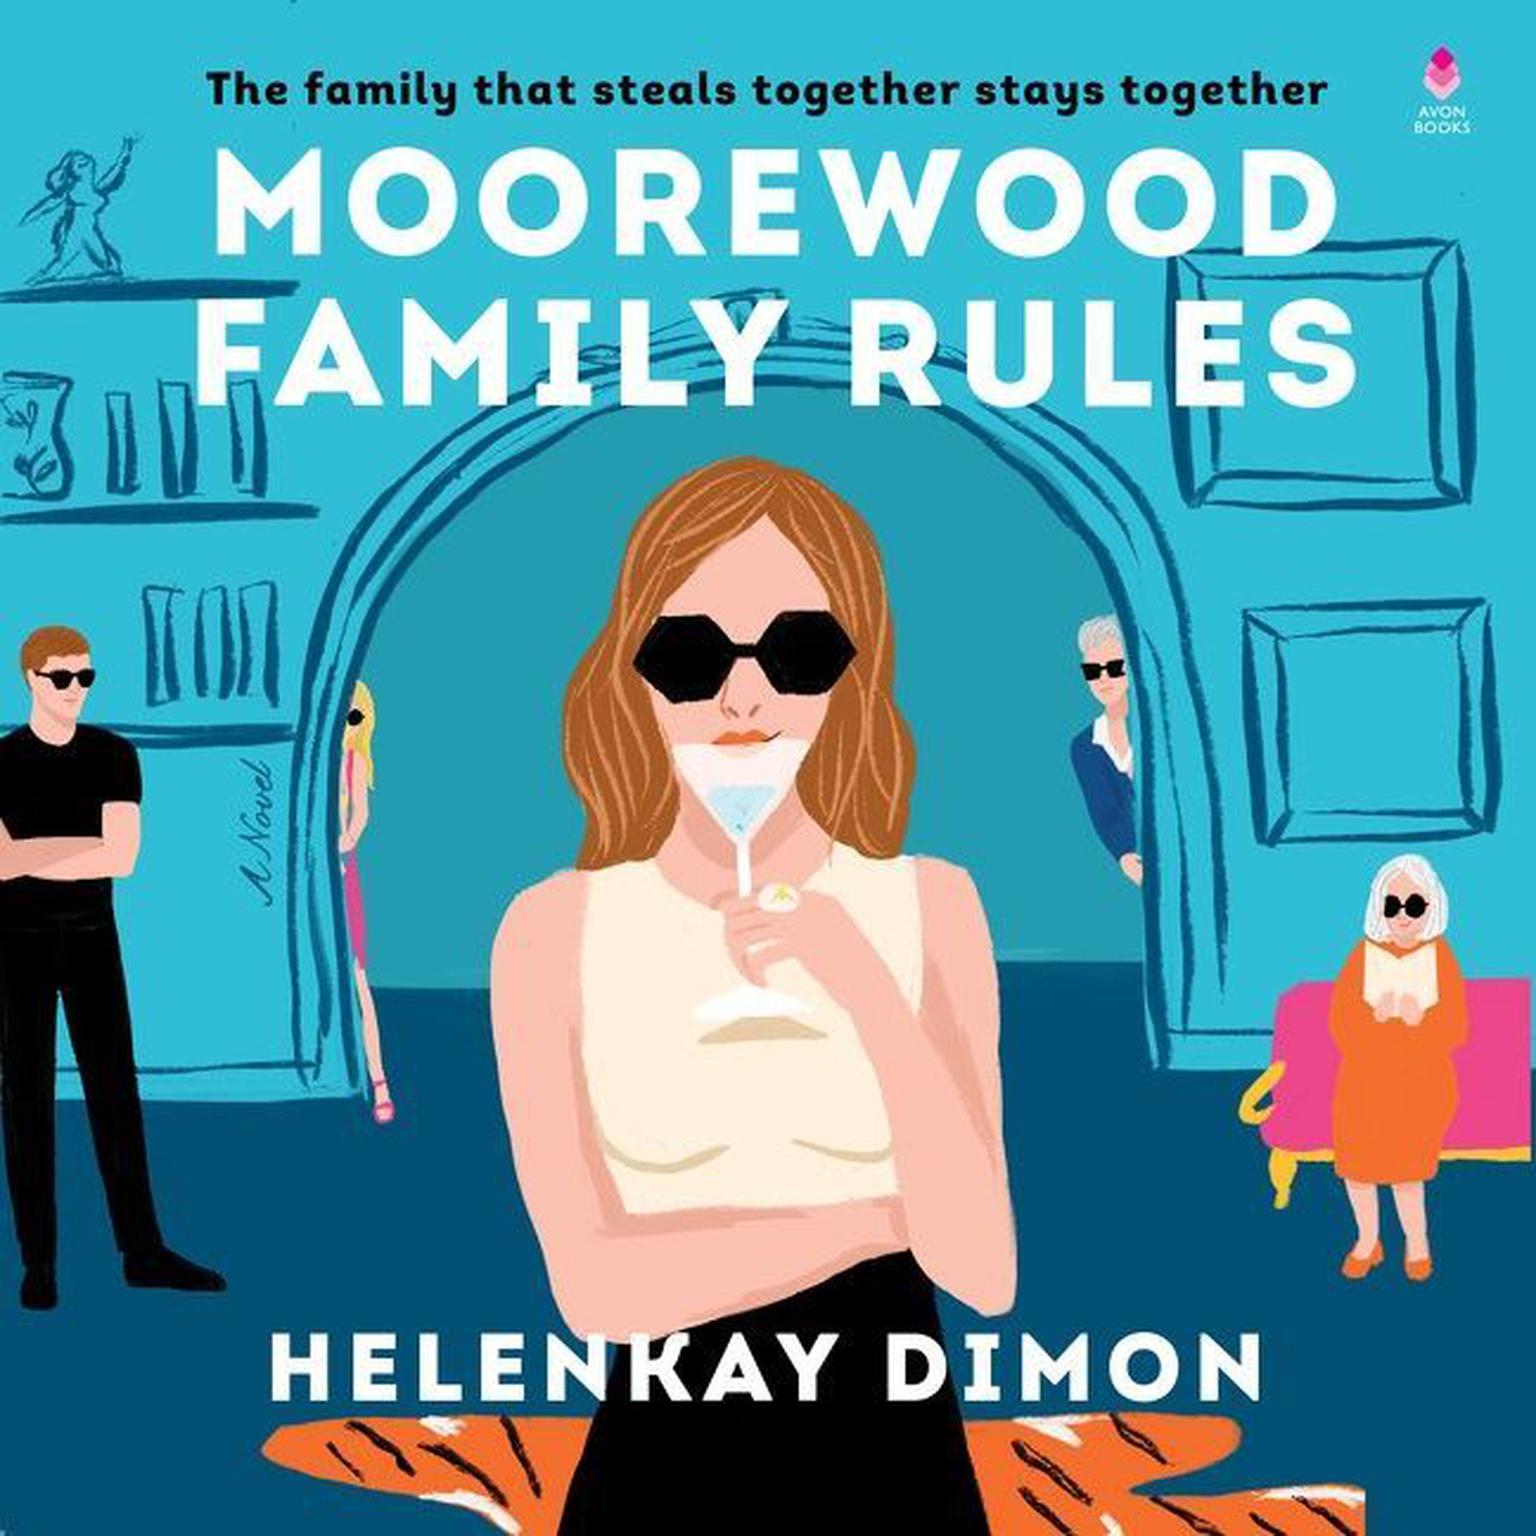 Moorewood Family Rules: A Novel Audiobook, by HelenKay Dimon